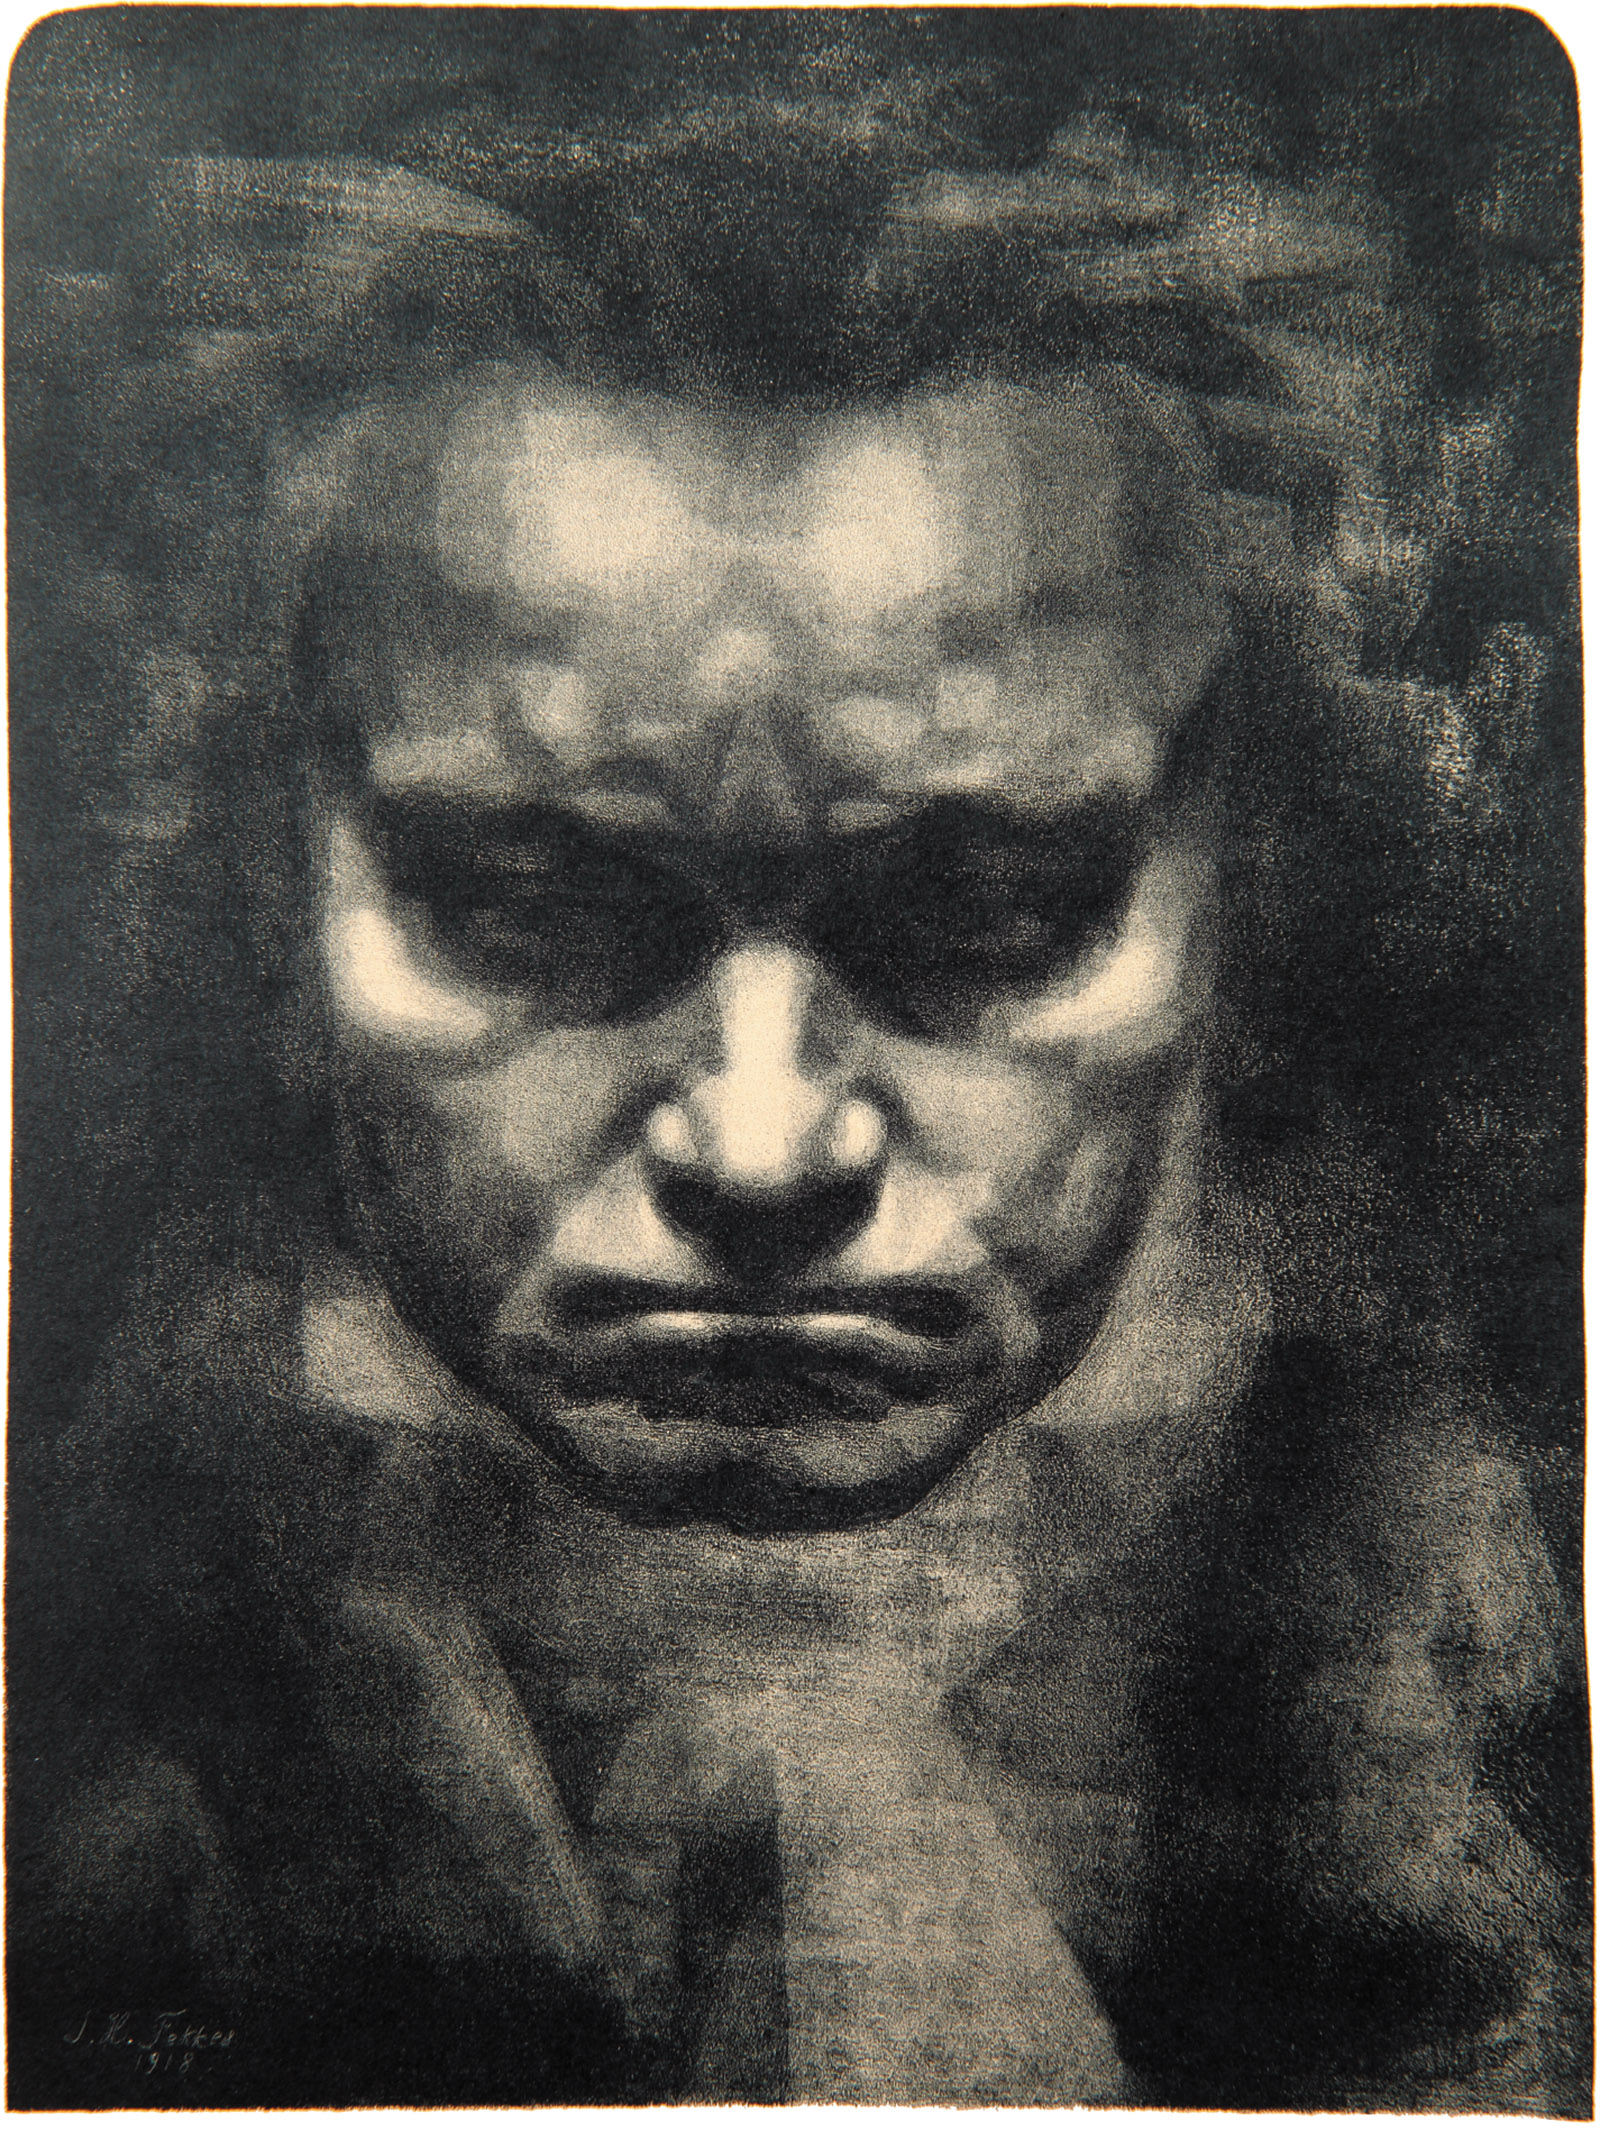 ‘Head of Beethoven’; lithograph by Johannes Hendricus Fekkes, 1918; from The Art of Music, the catalog of a recent exhibition at the San Diego Museum of Art, published by Yale University Press